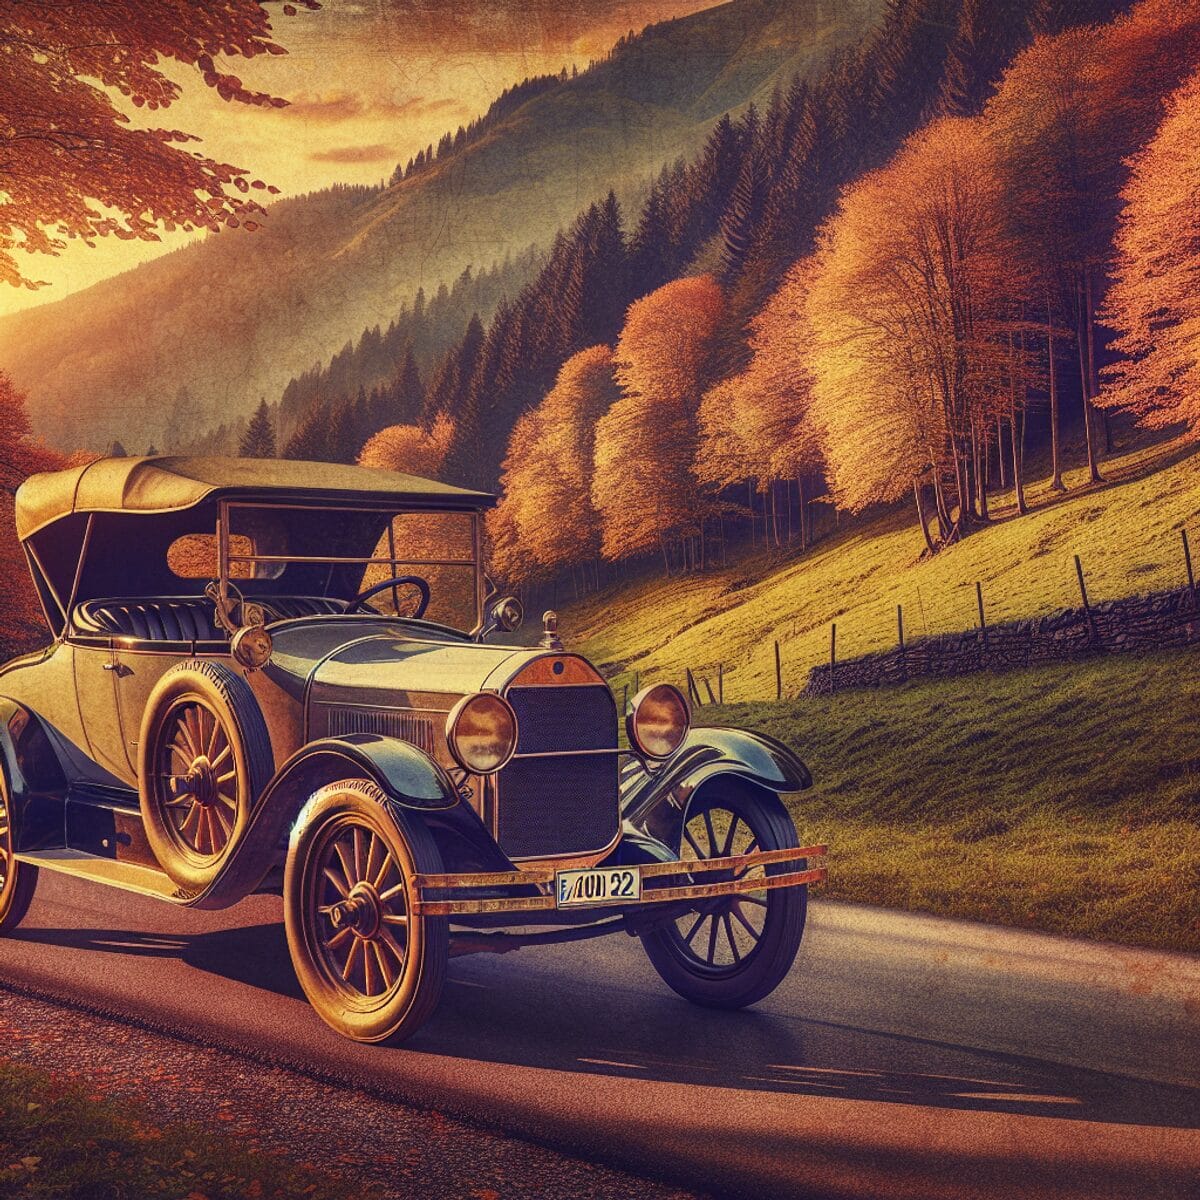 Vintage automobile driving on a winding road surrounded by lush, colorful foliage at sunset.